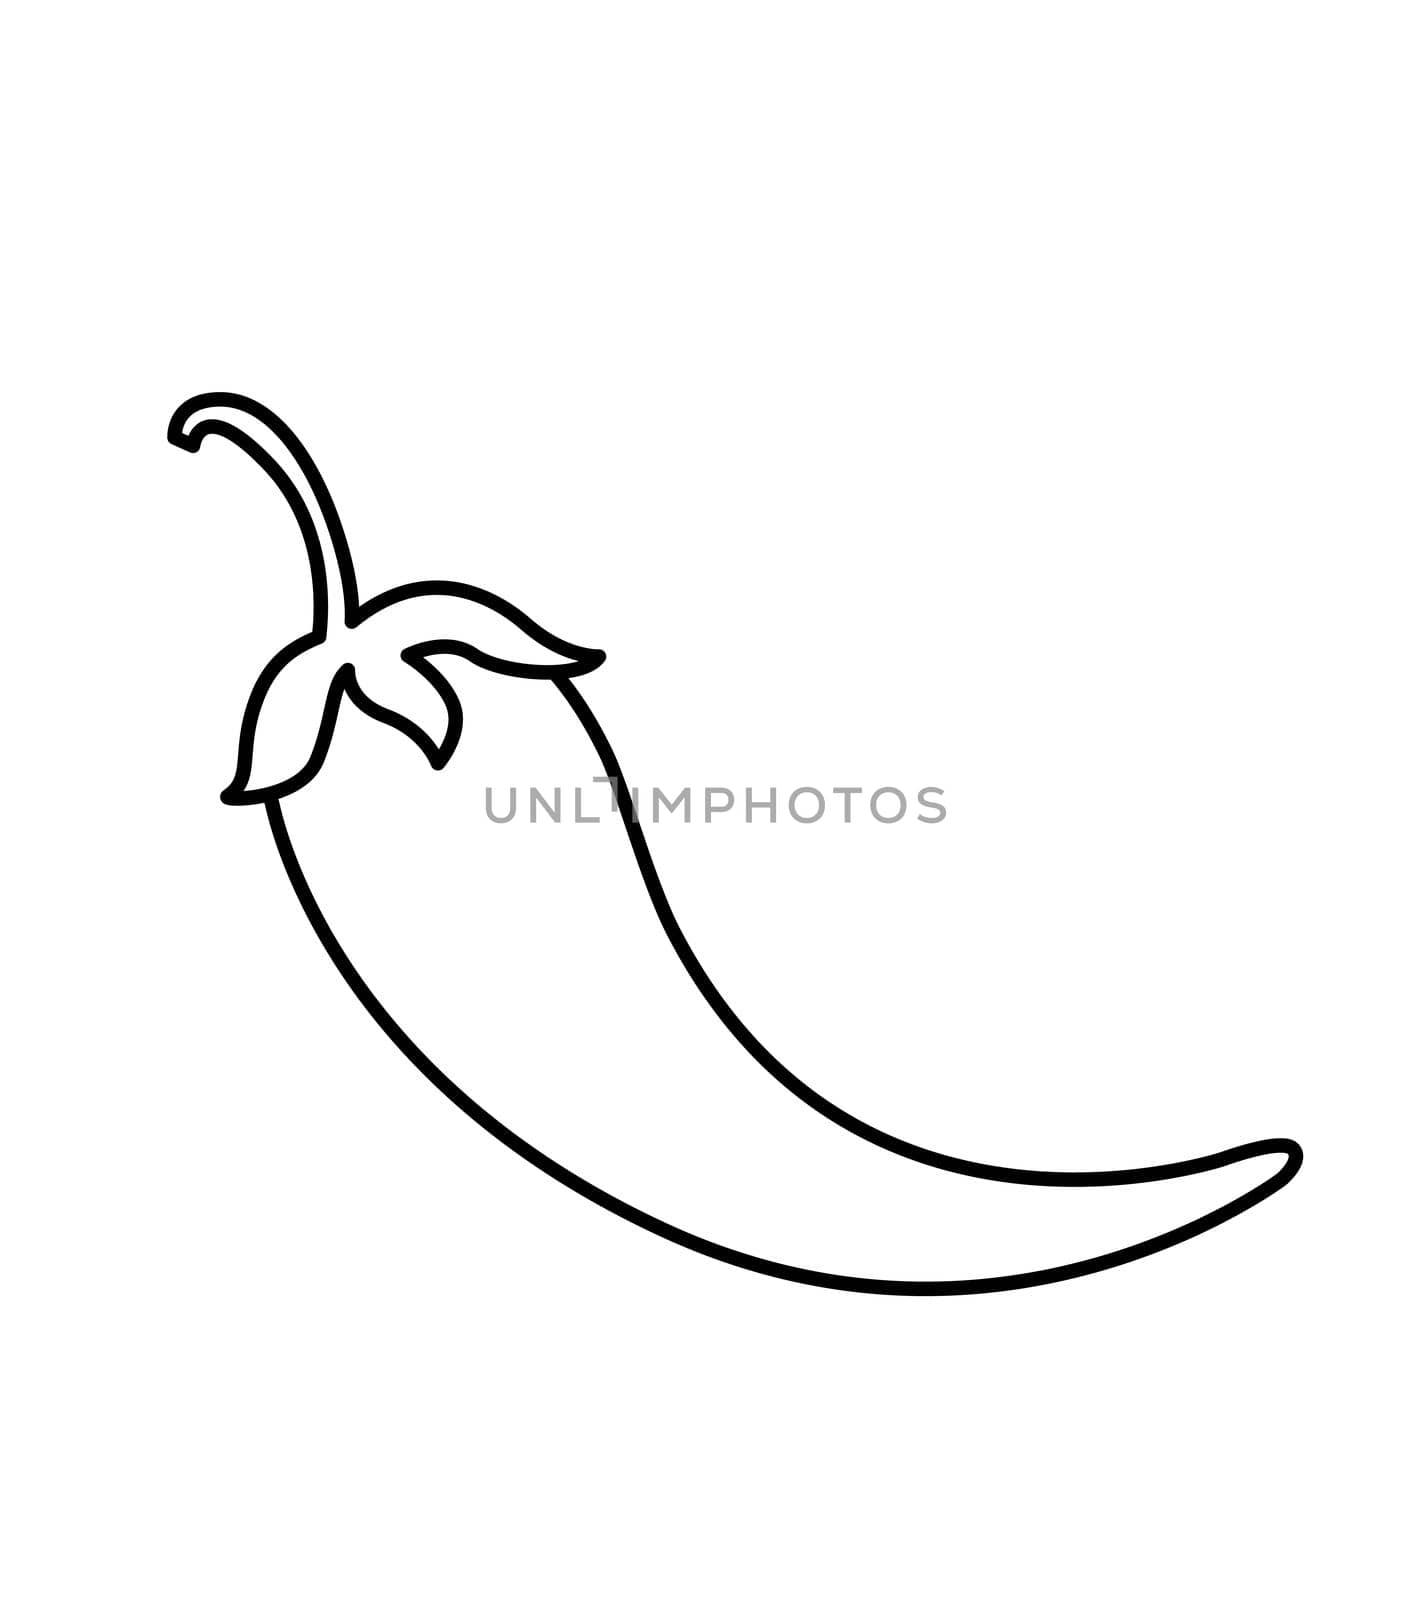 Chili pepper web line black icon vector isolated on white background by Esfir98